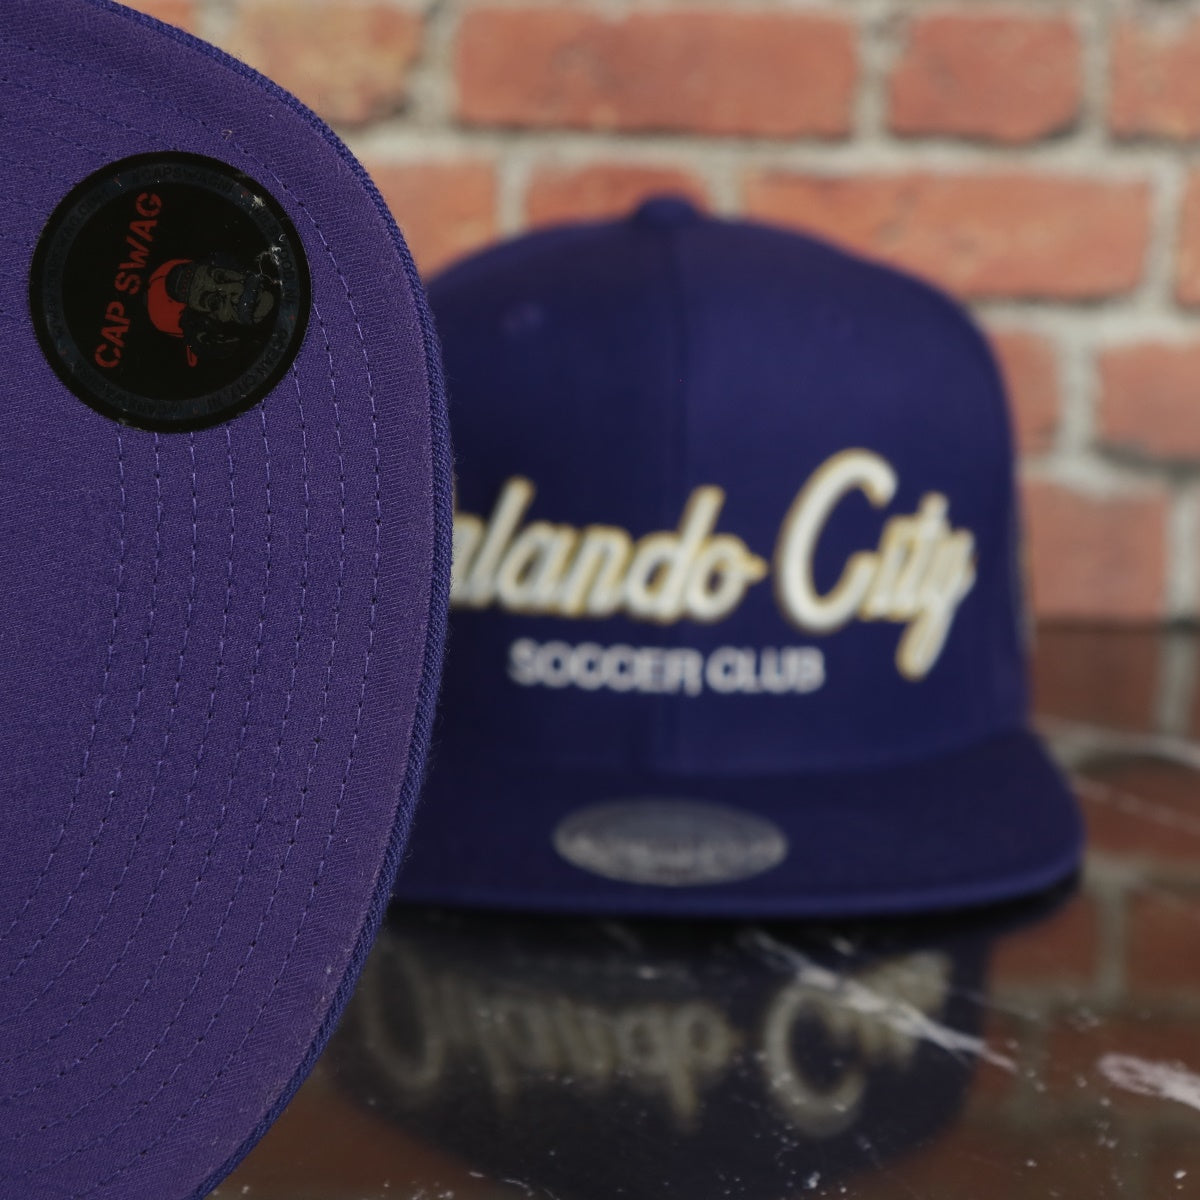 Orlando City Lions Mitchell and Ness Script Snapback Hat